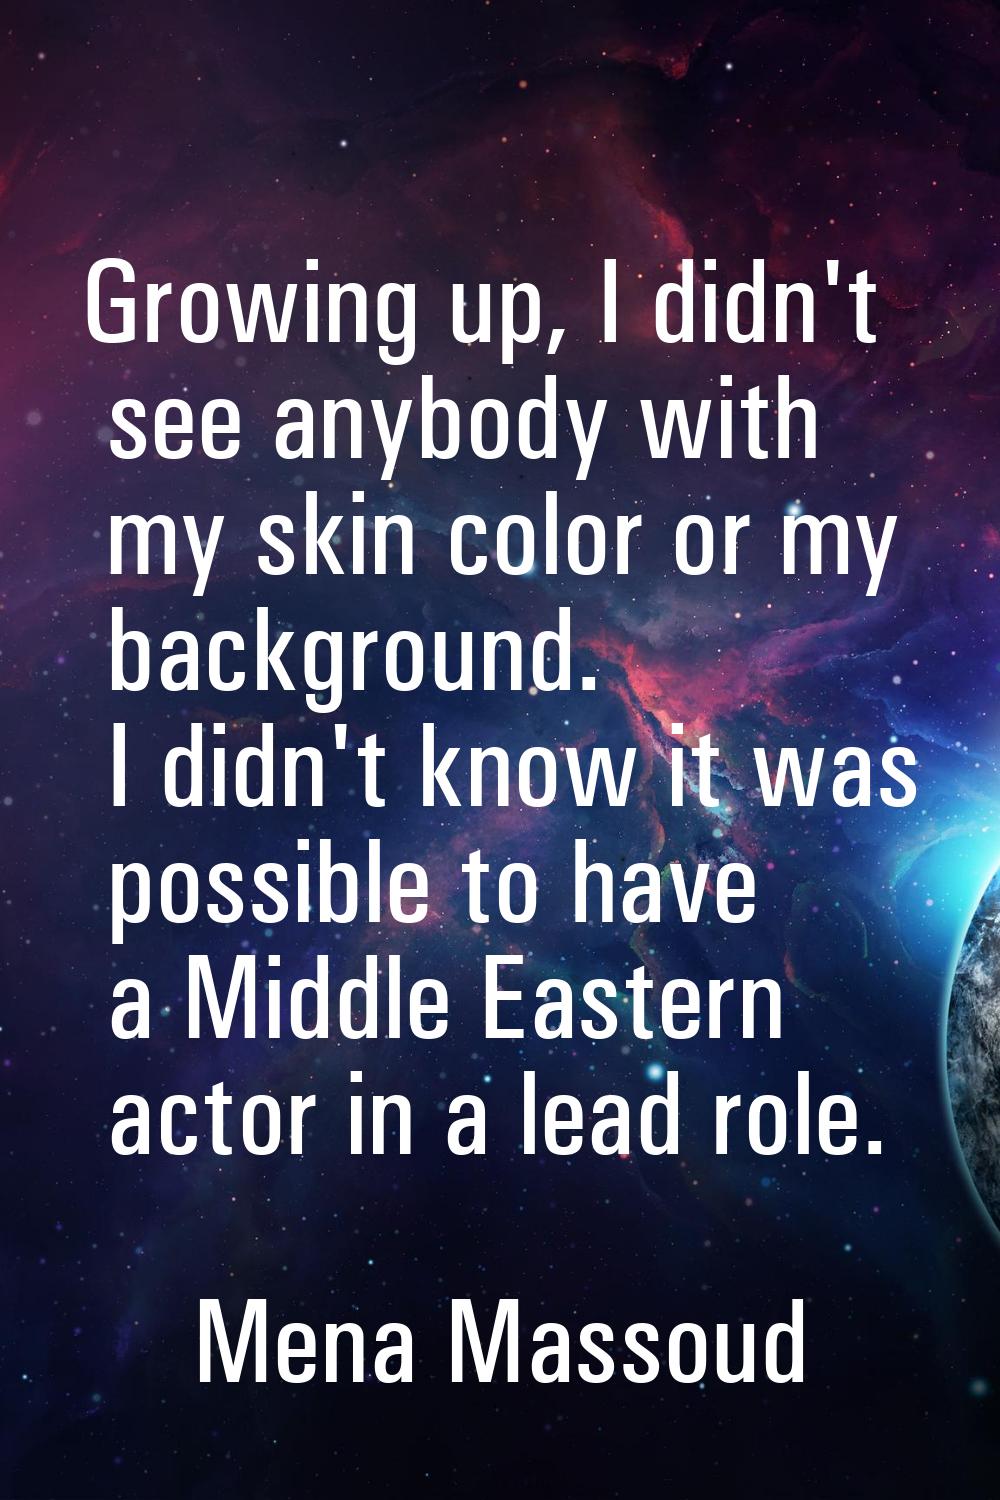 Growing up, I didn't see anybody with my skin color or my background. I didn't know it was possible